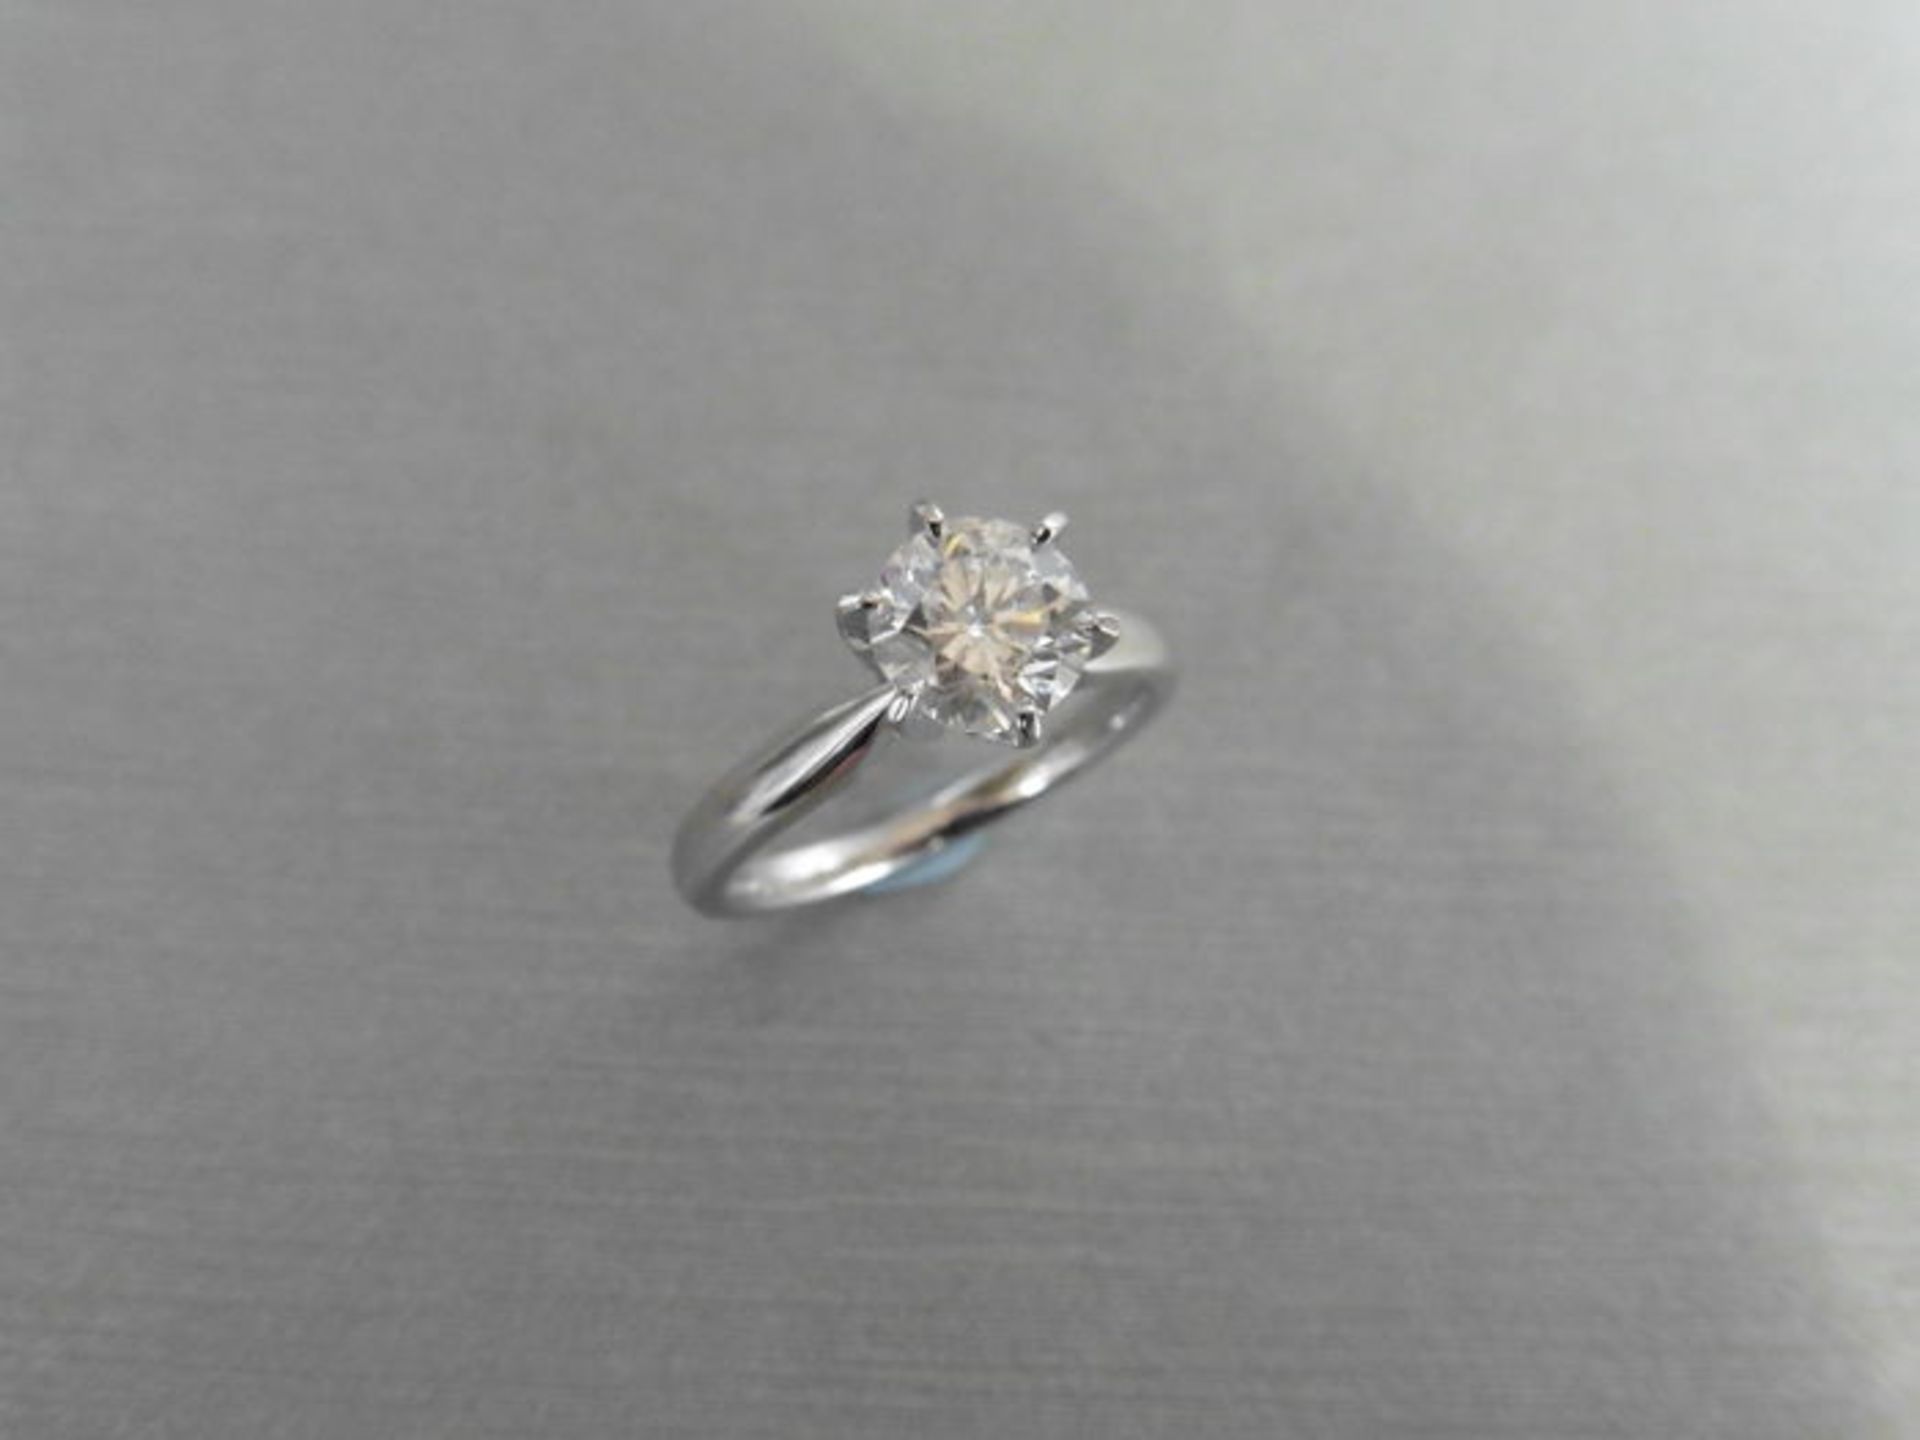 1.05ct Diamond solitaire ring with a brilliant cut diamond, H colour and Si1 clarity. Set in